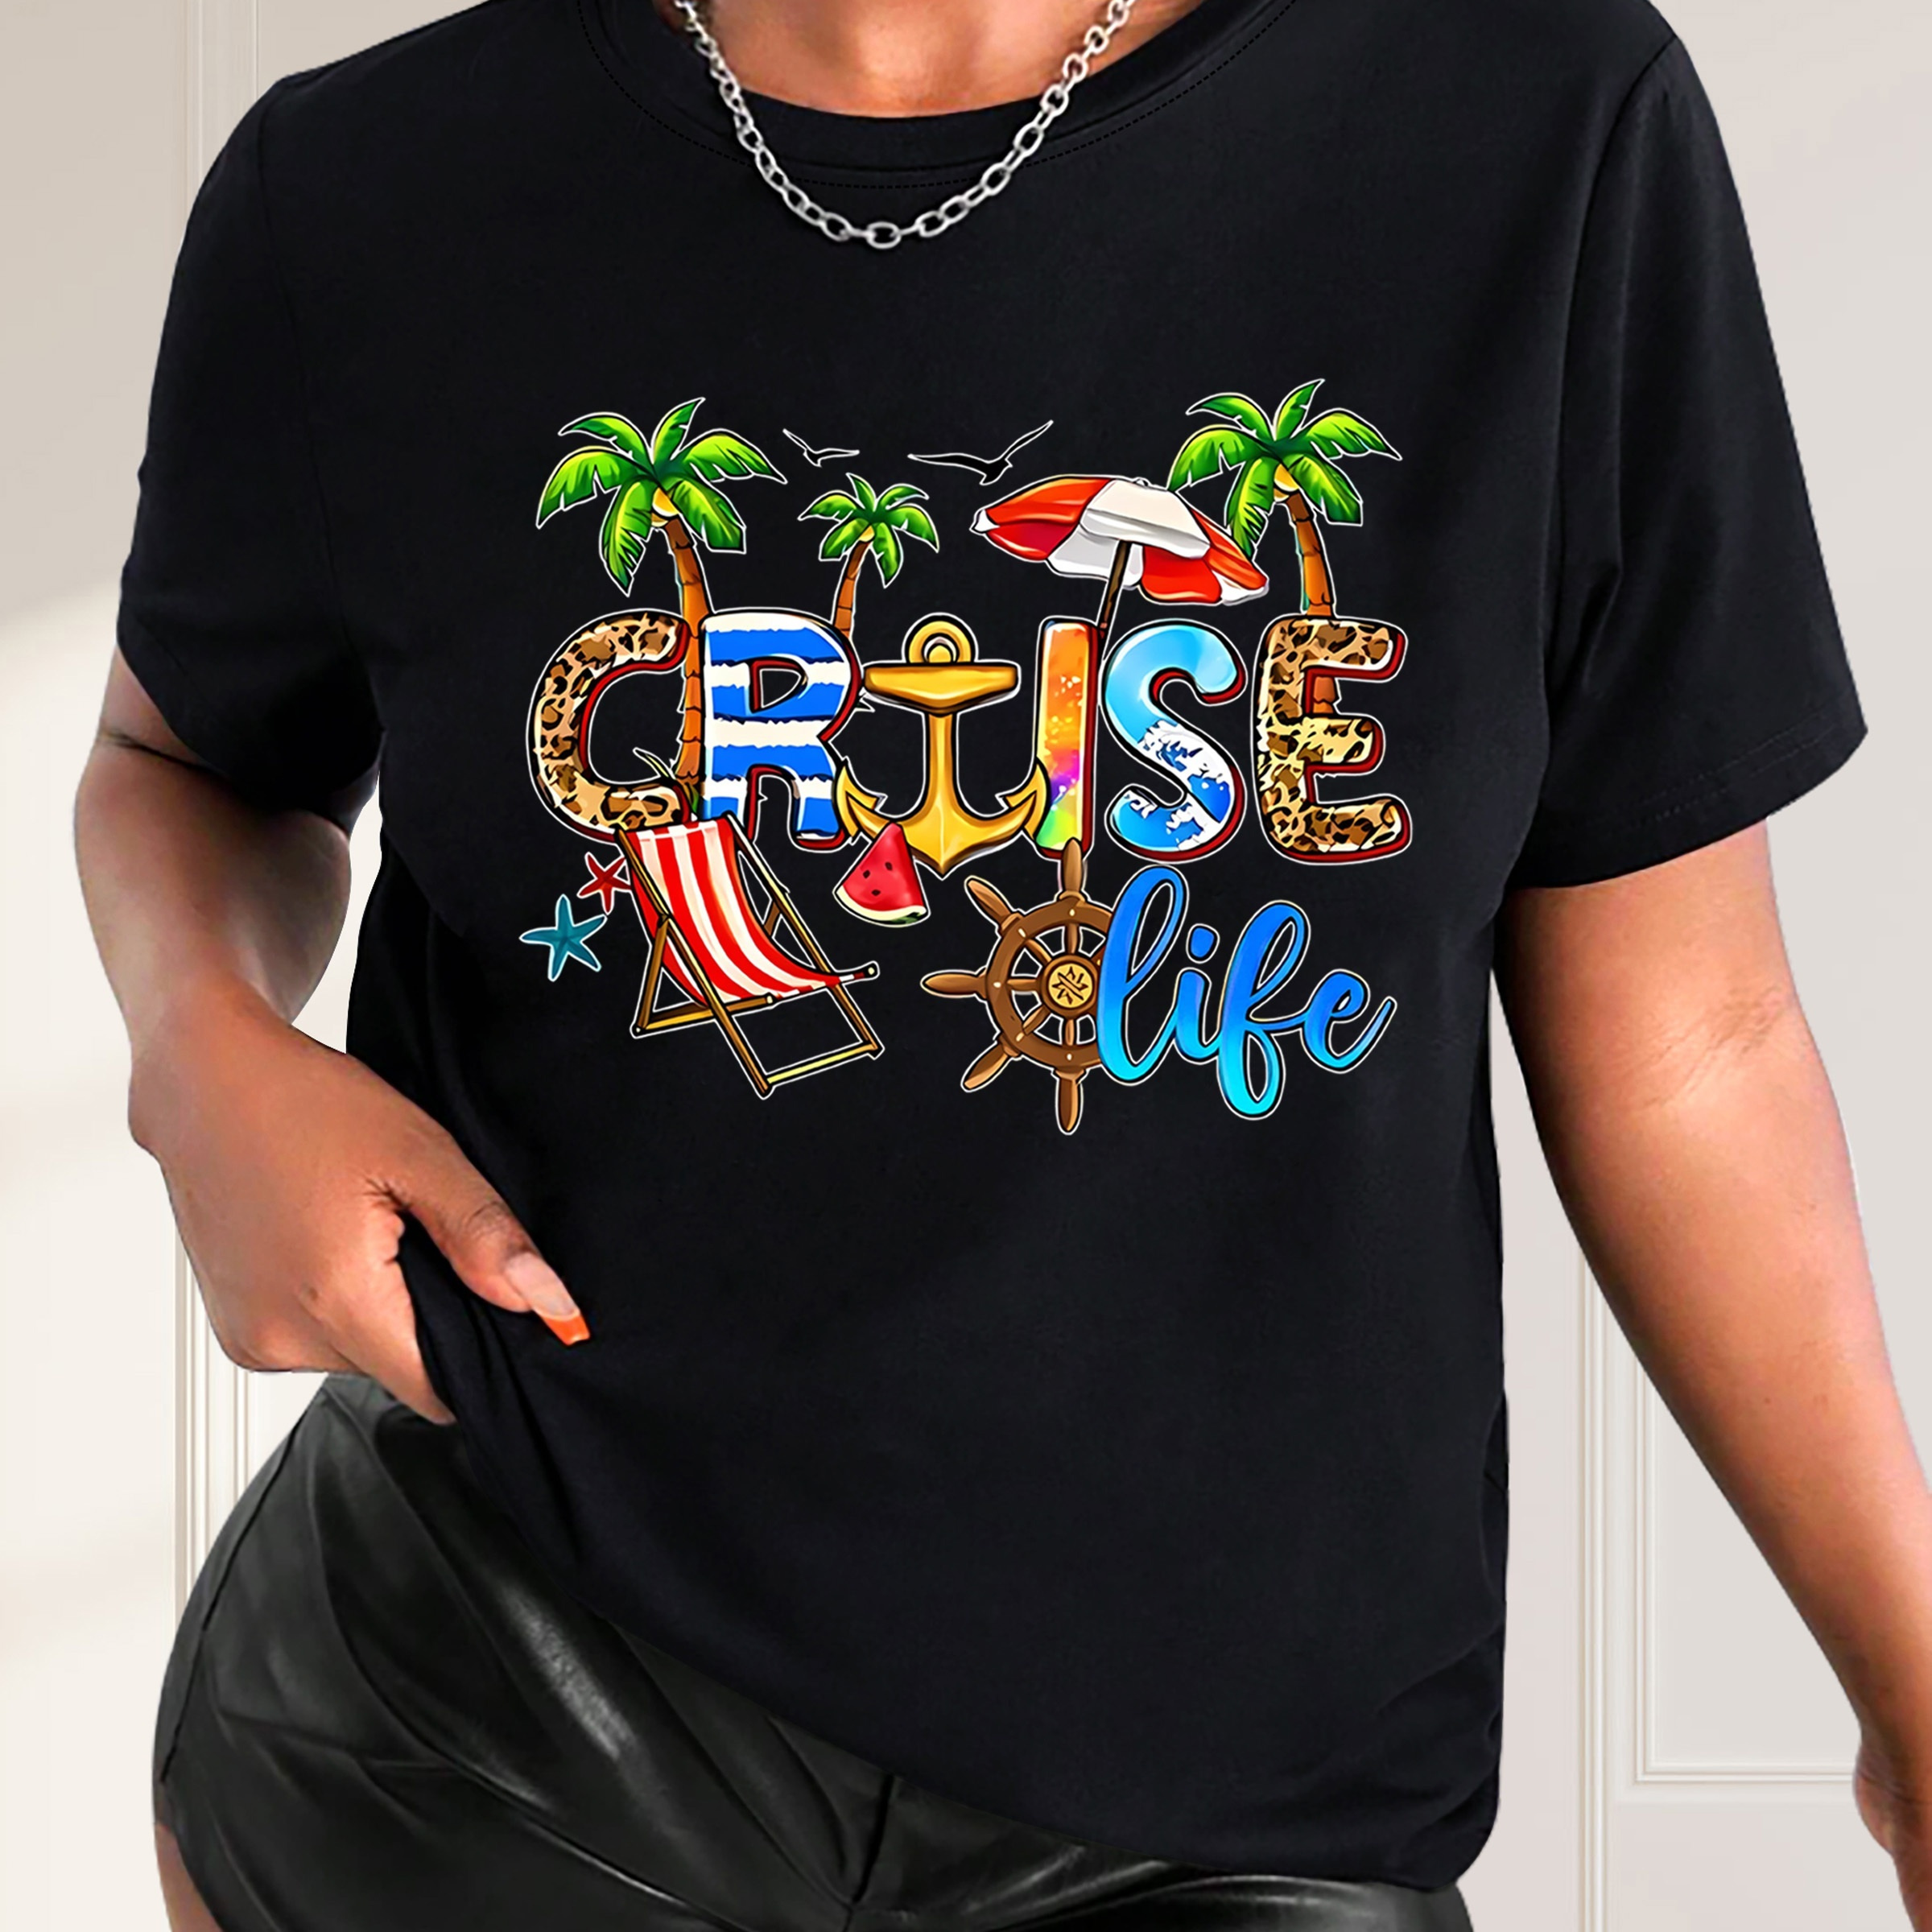 

Beach Coconut Tree Cruise Graphic Short Sleeves Sports Tee, Round Neck Workout Causal T-shirt Top, Women's Activewear